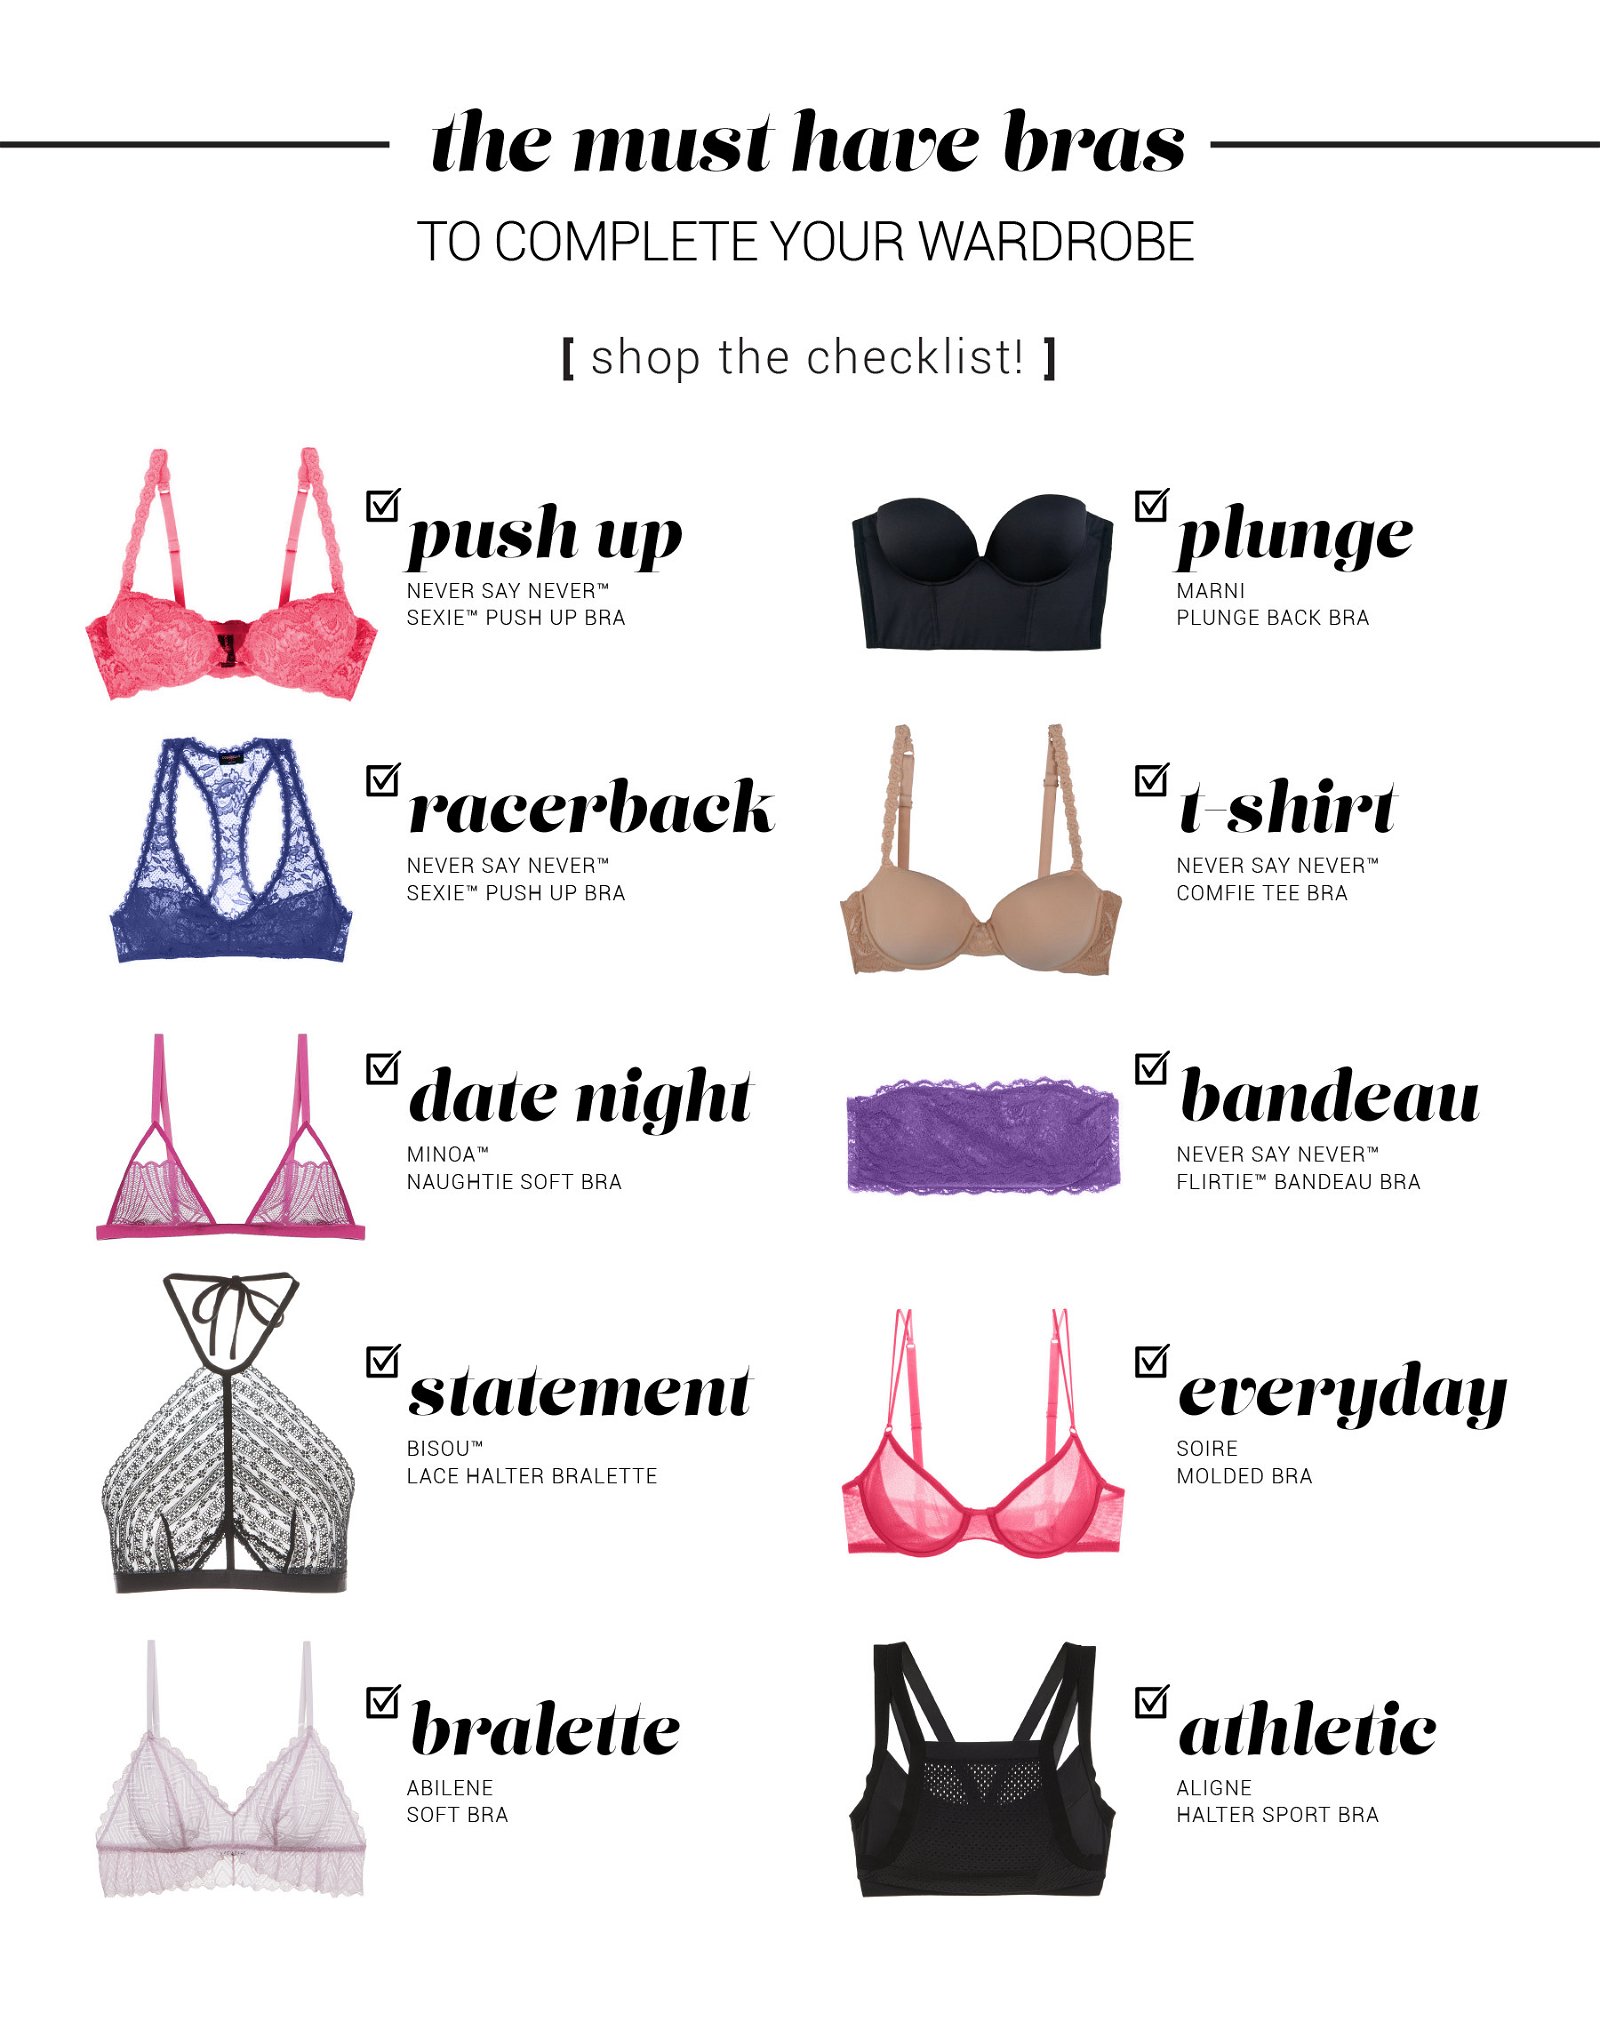 Time to treat yourself to a new bra, you DESERVE to be comfortable 💗